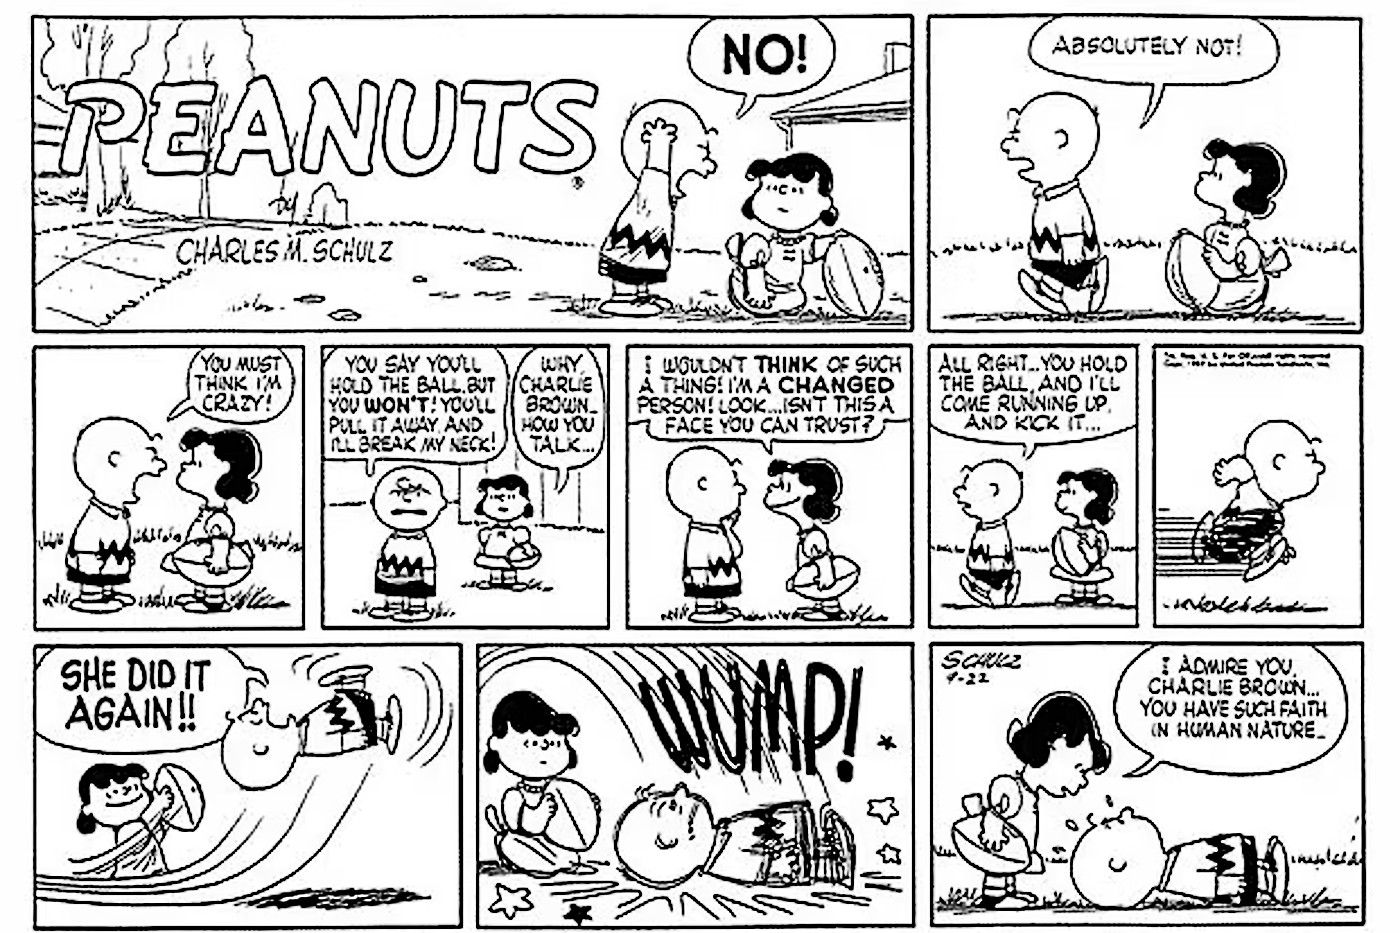 Peanuts, Lucy tells Charlie Brown he has such faith in human nature, after pulling the football away from him